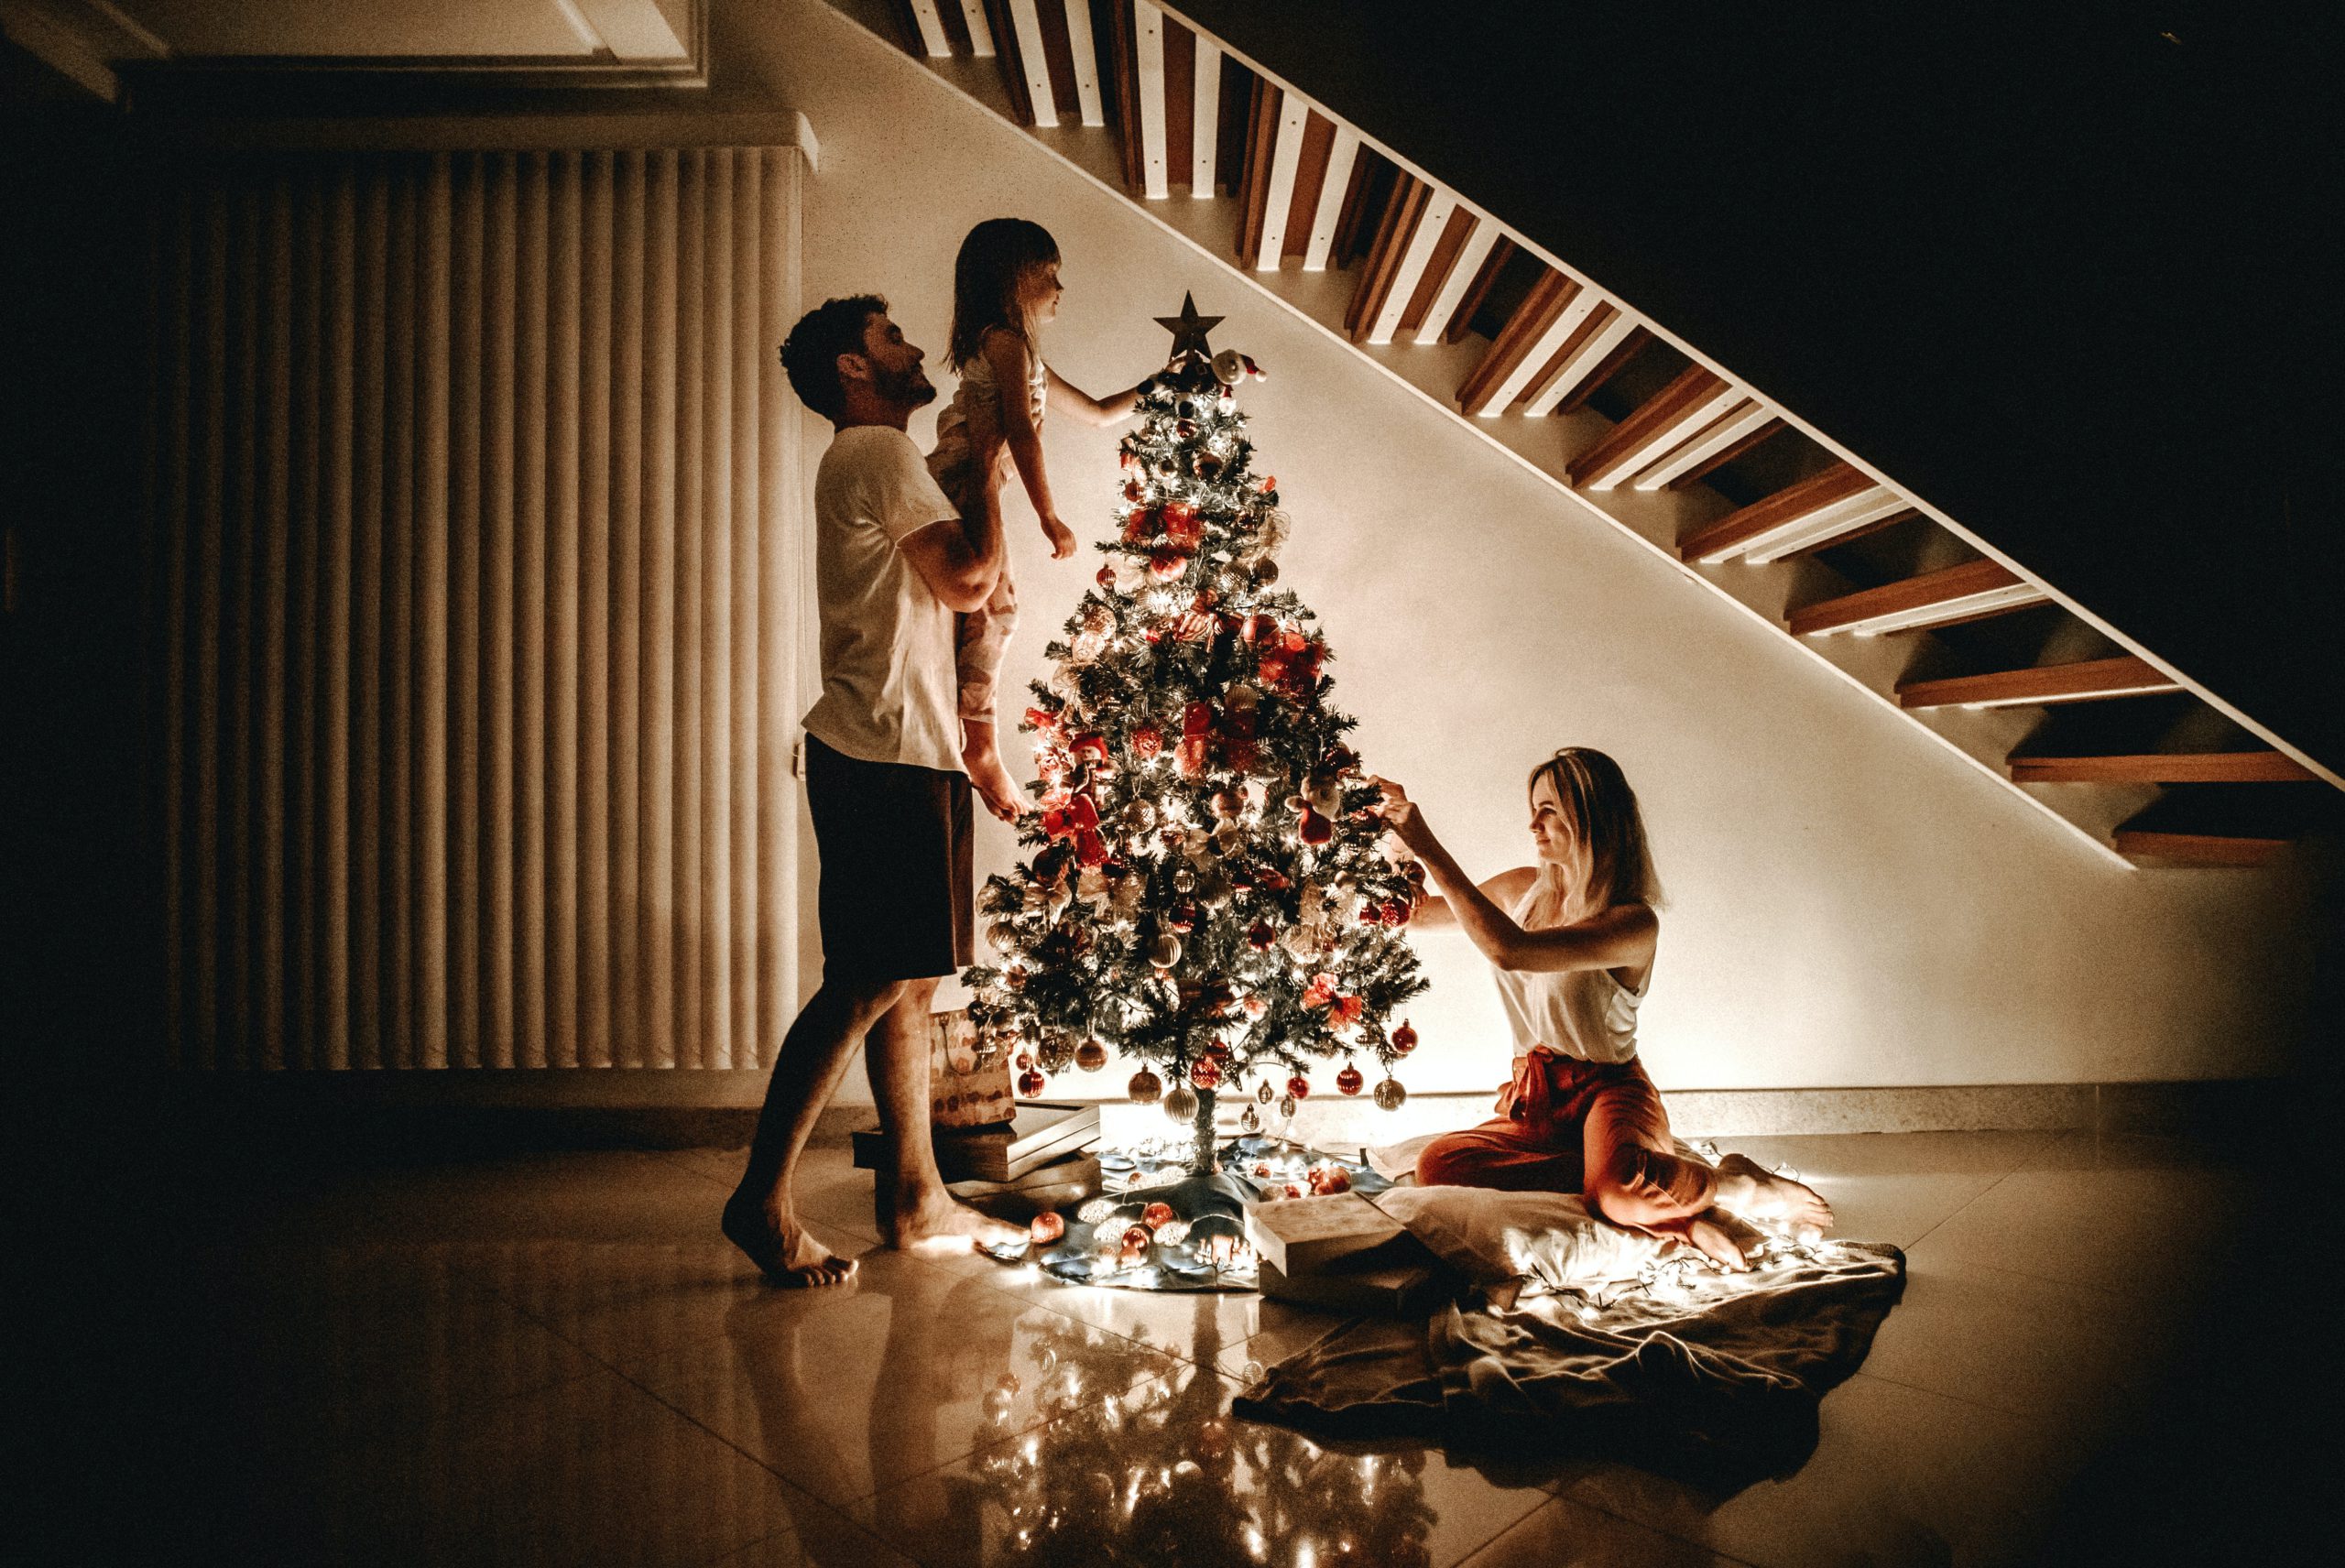 Ways to Make the Most of Family Time Over the Holidays